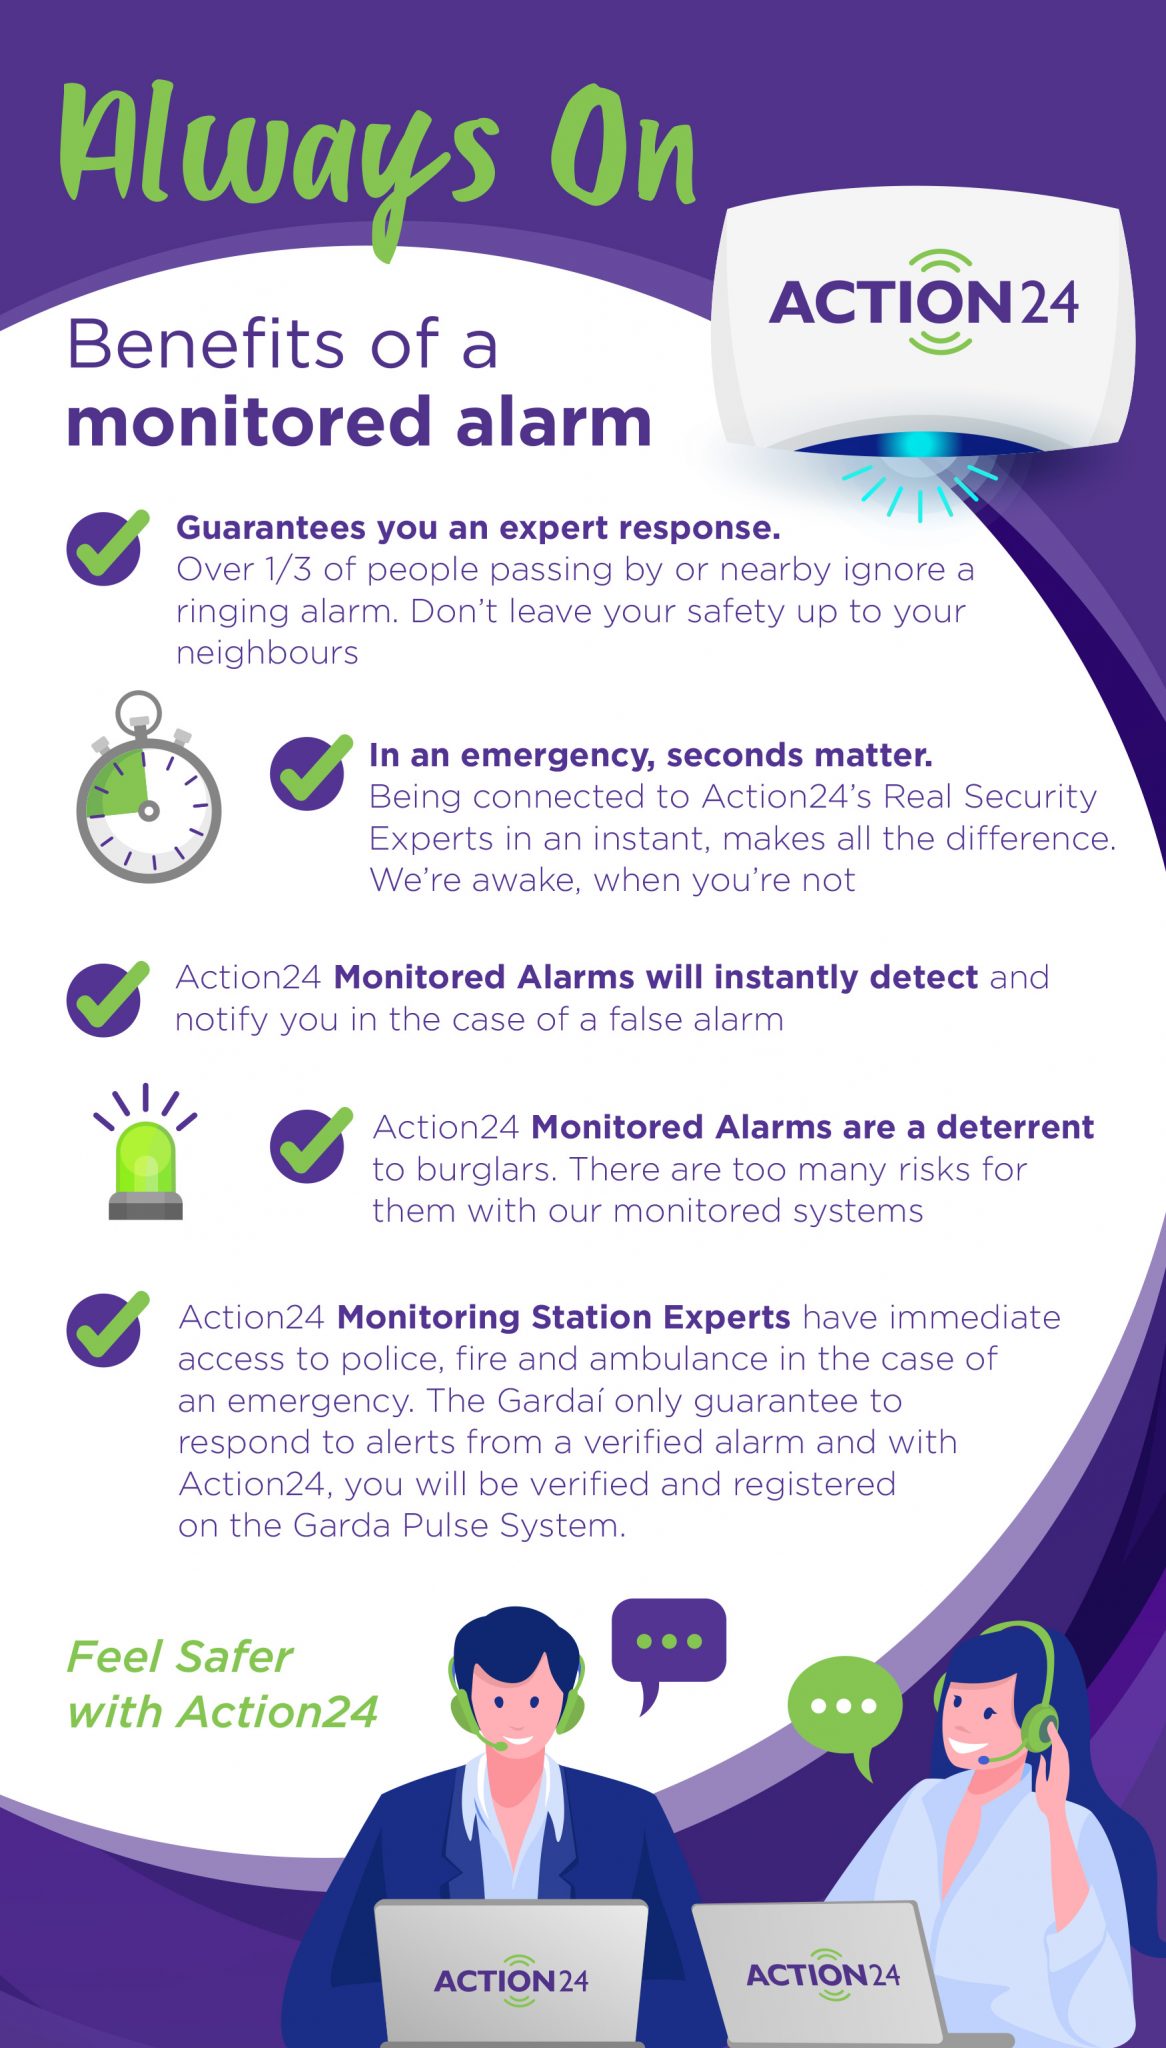 What are the Benefits of a Monitored Alarm system?